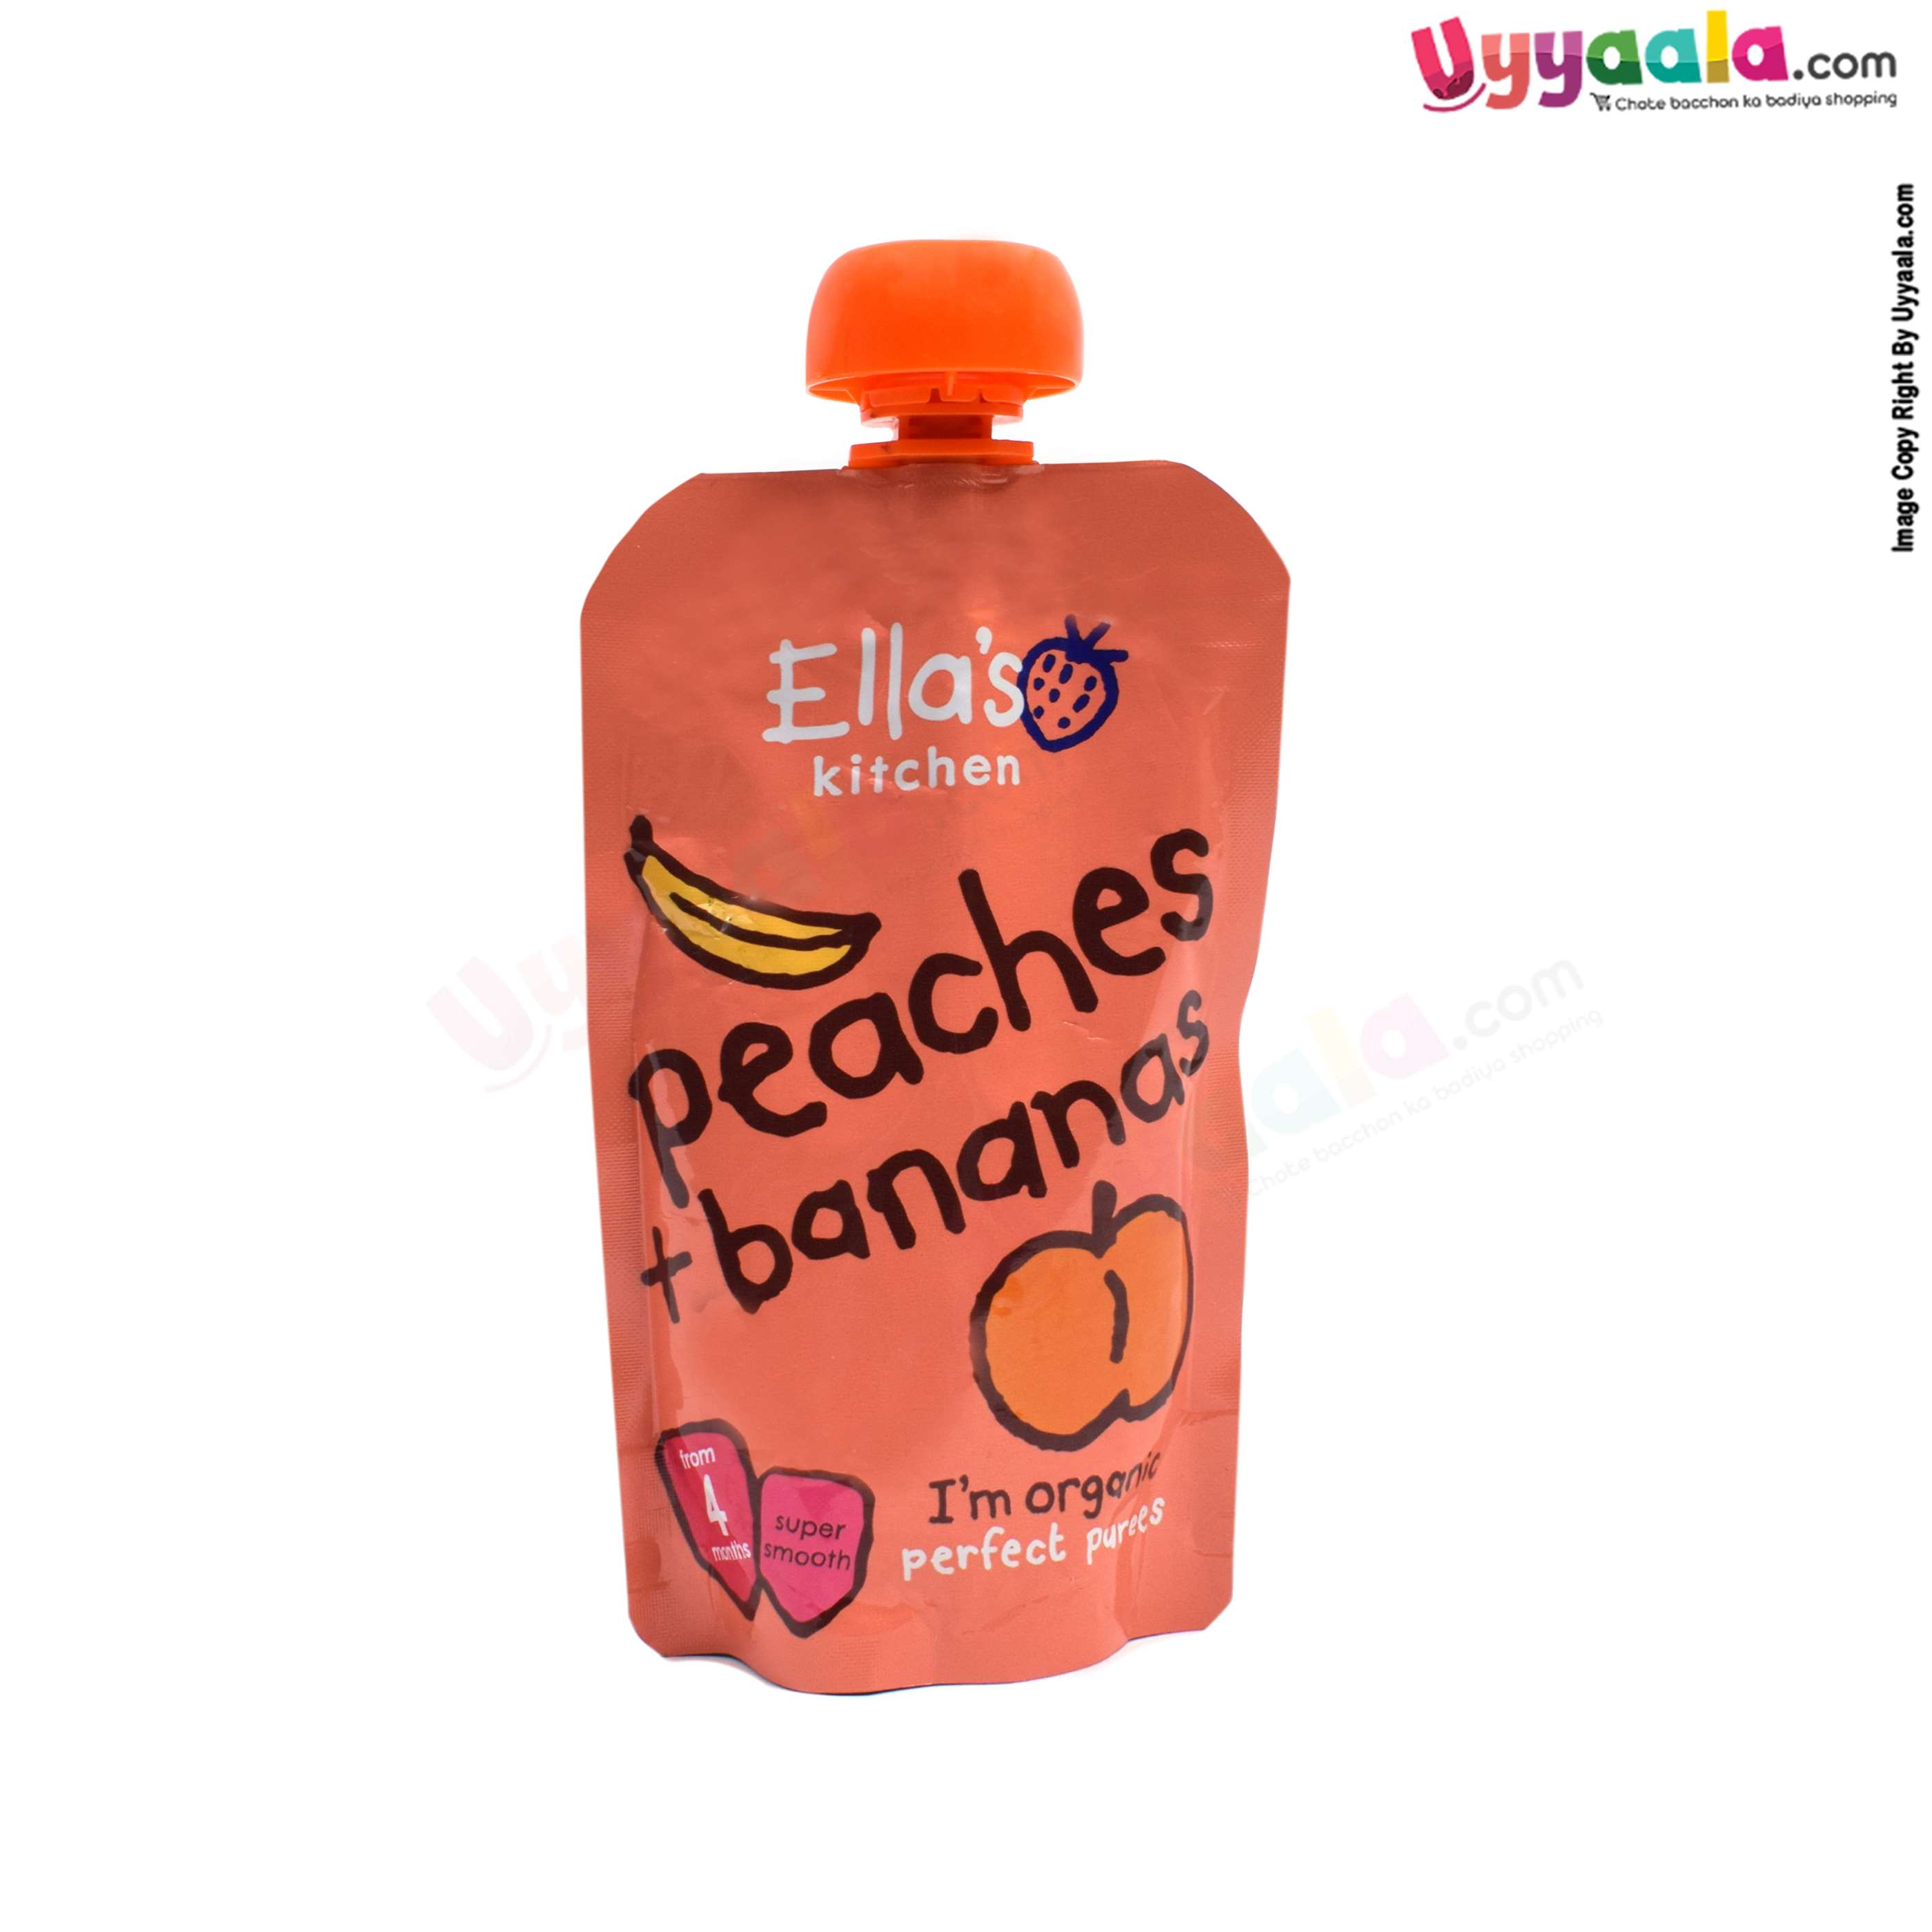 ELLA'S KITCHEN Peaches + bananas, super smooth purees for babies - 120gm, 4 months +